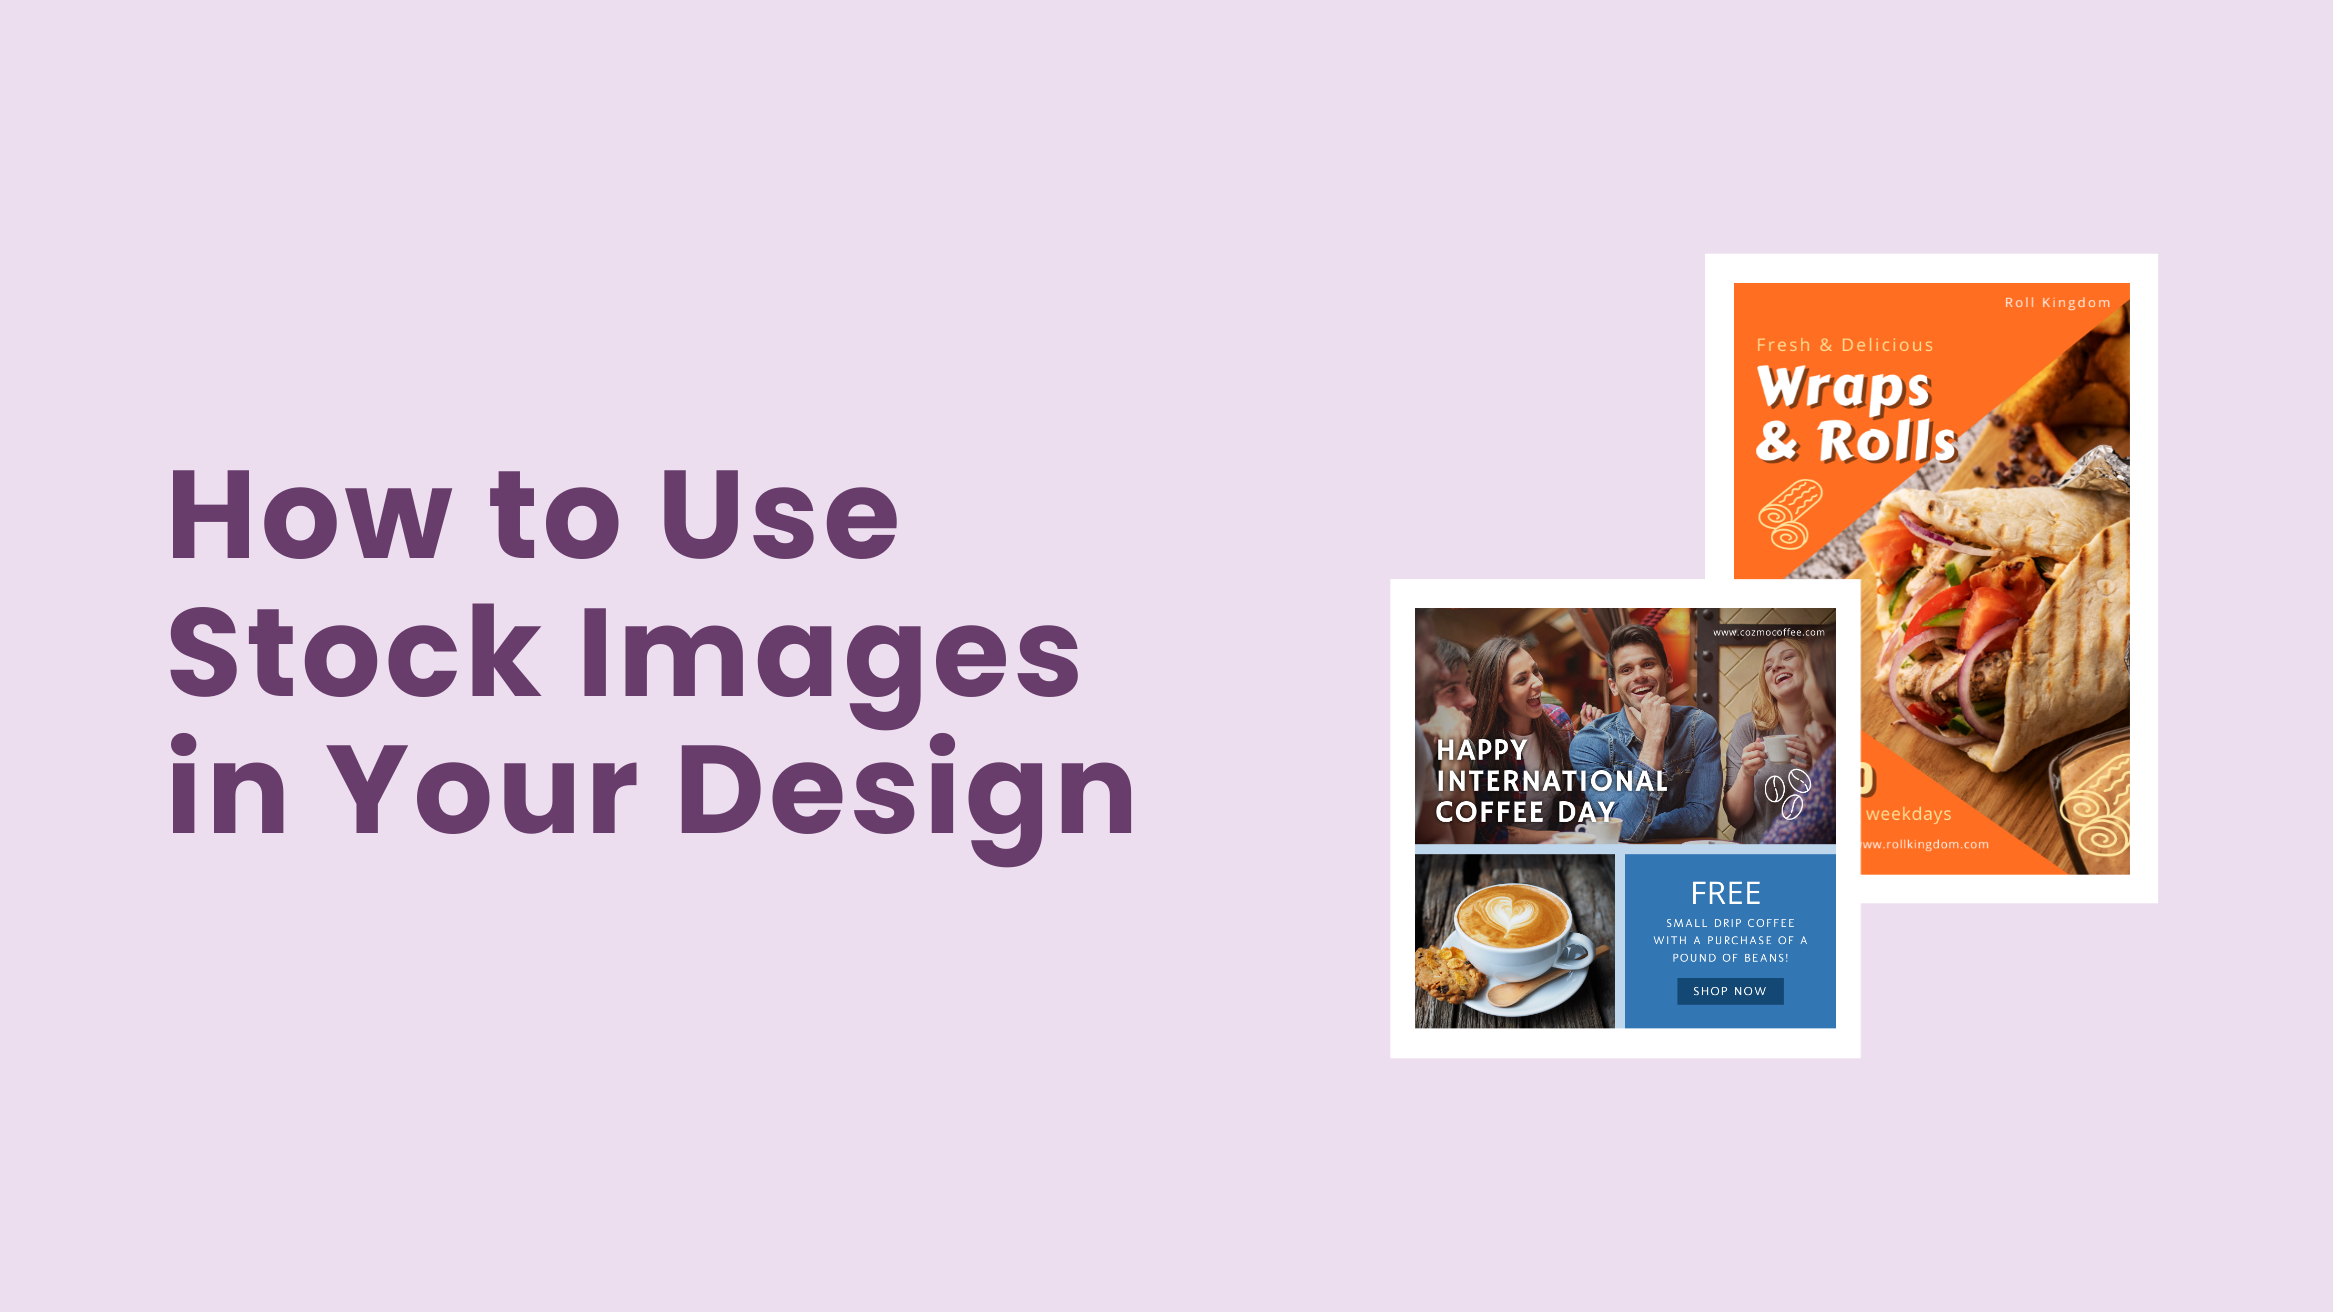 How to Use Stock Images in Your Design